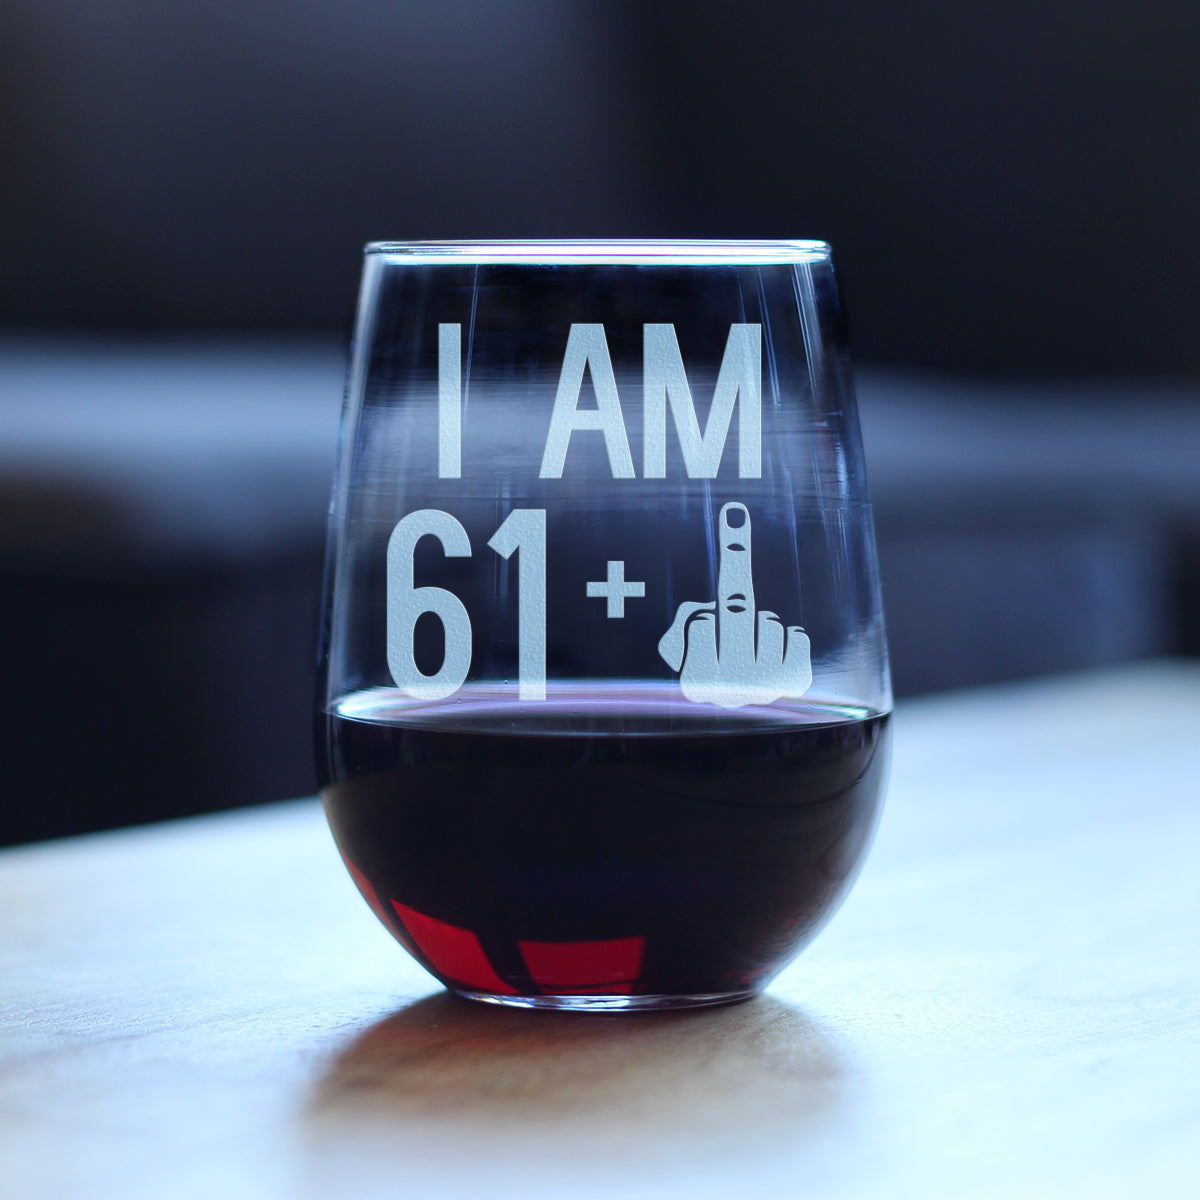 61 + 1 Middle Finger - 62nd Birthday Stemless Wine Glass for Women &amp; Men - Cute Funny Wine Gift Idea - Unique Personalized Bday Glasses for Best Friend Turning 62 - Drinking Party Decoration